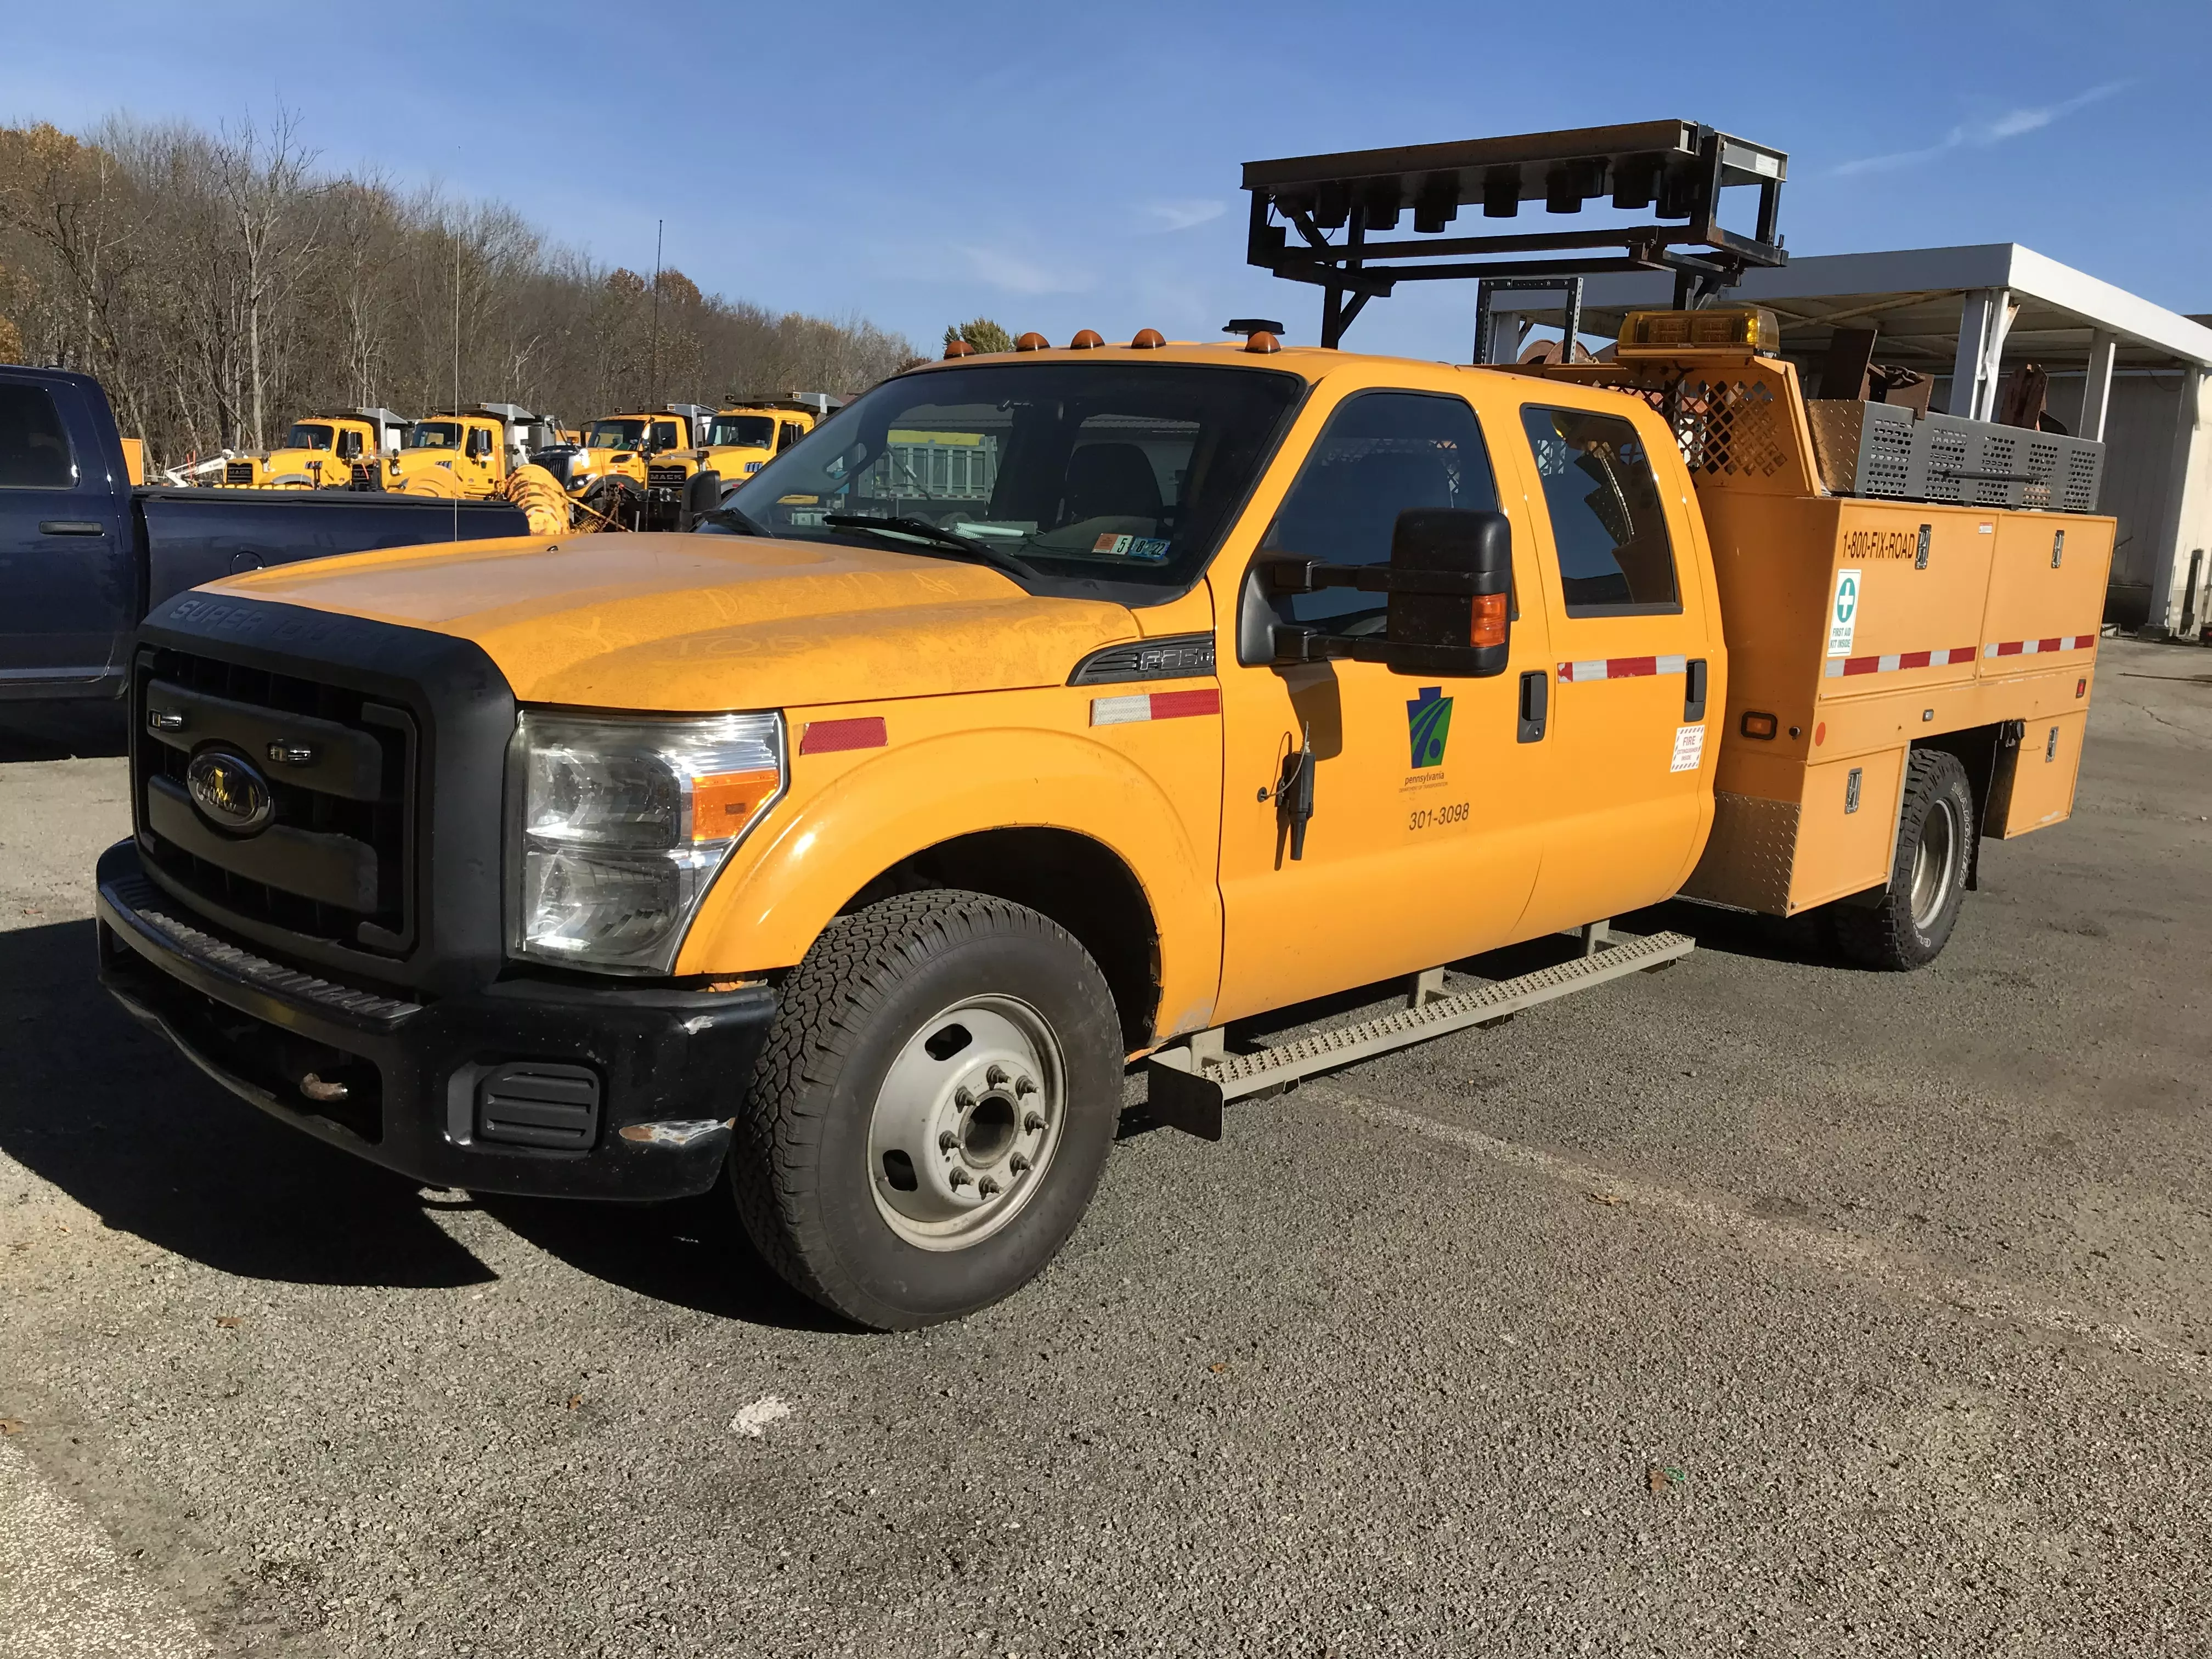 An image of a yellow PennDOT crew cab pickup truck that is now repaired from the parts taken from other PennDOT vehicles.